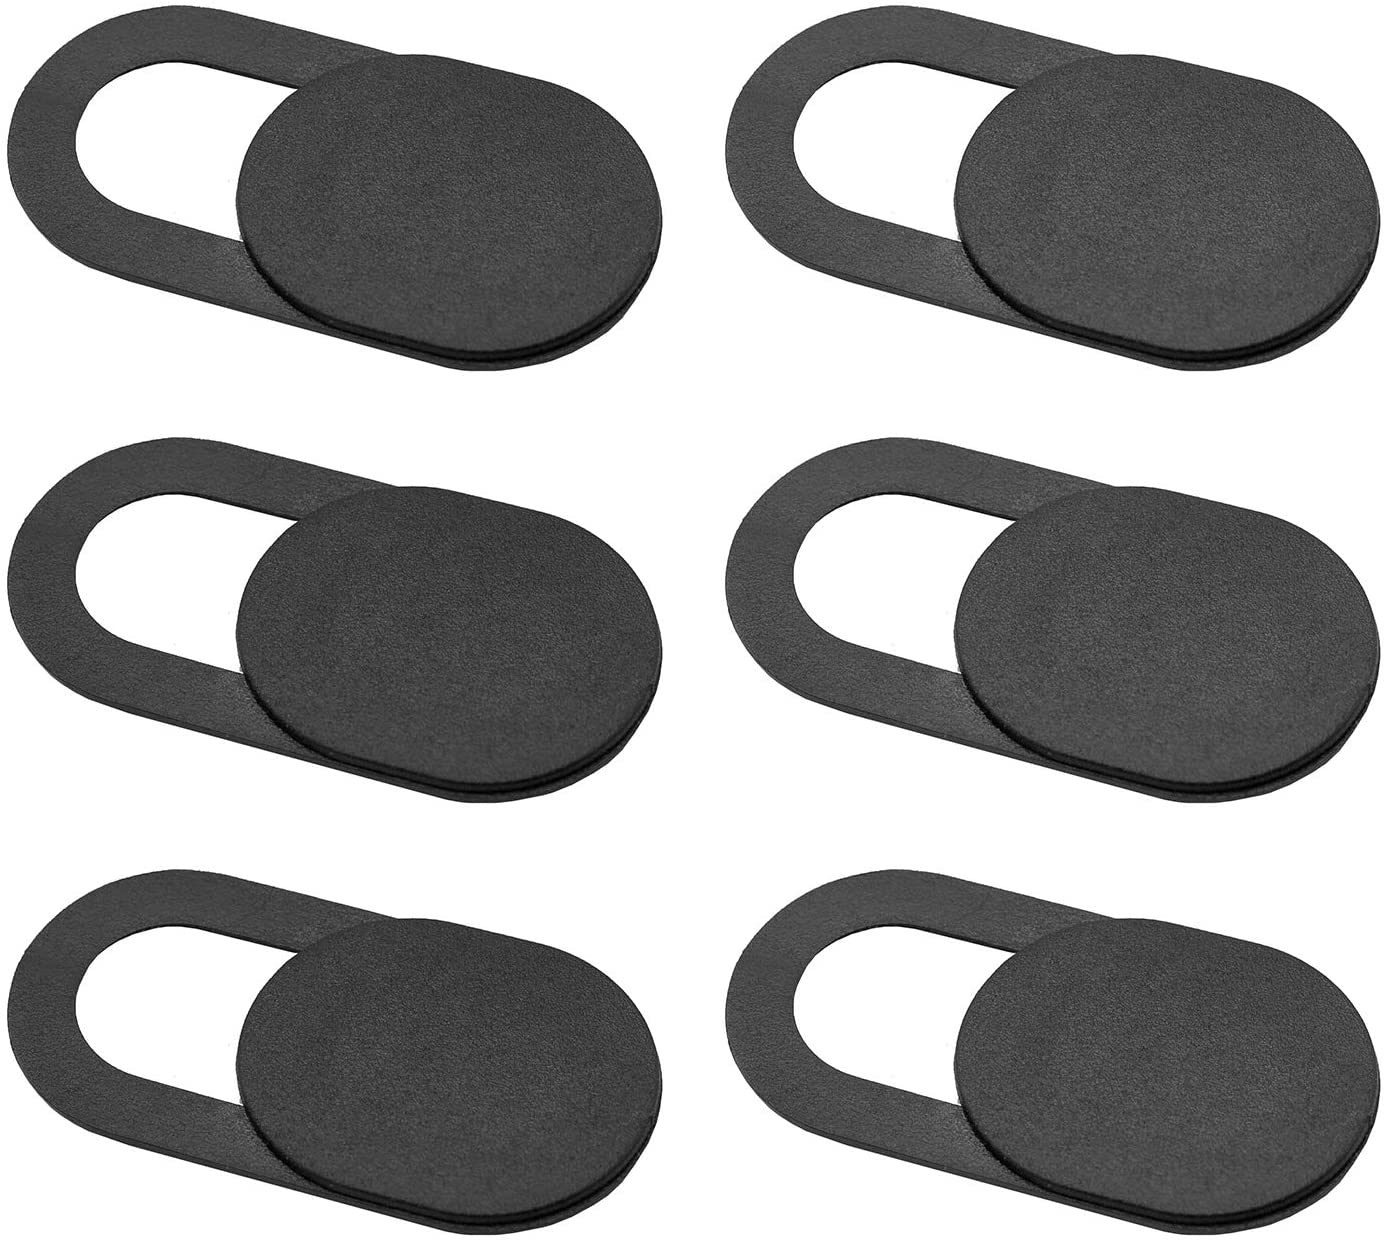 Camera Cover Slide 9 Pack(3 Large + 6 Small) Webcam Cover Fit Most Laptop,  PC, Tablet (Black)